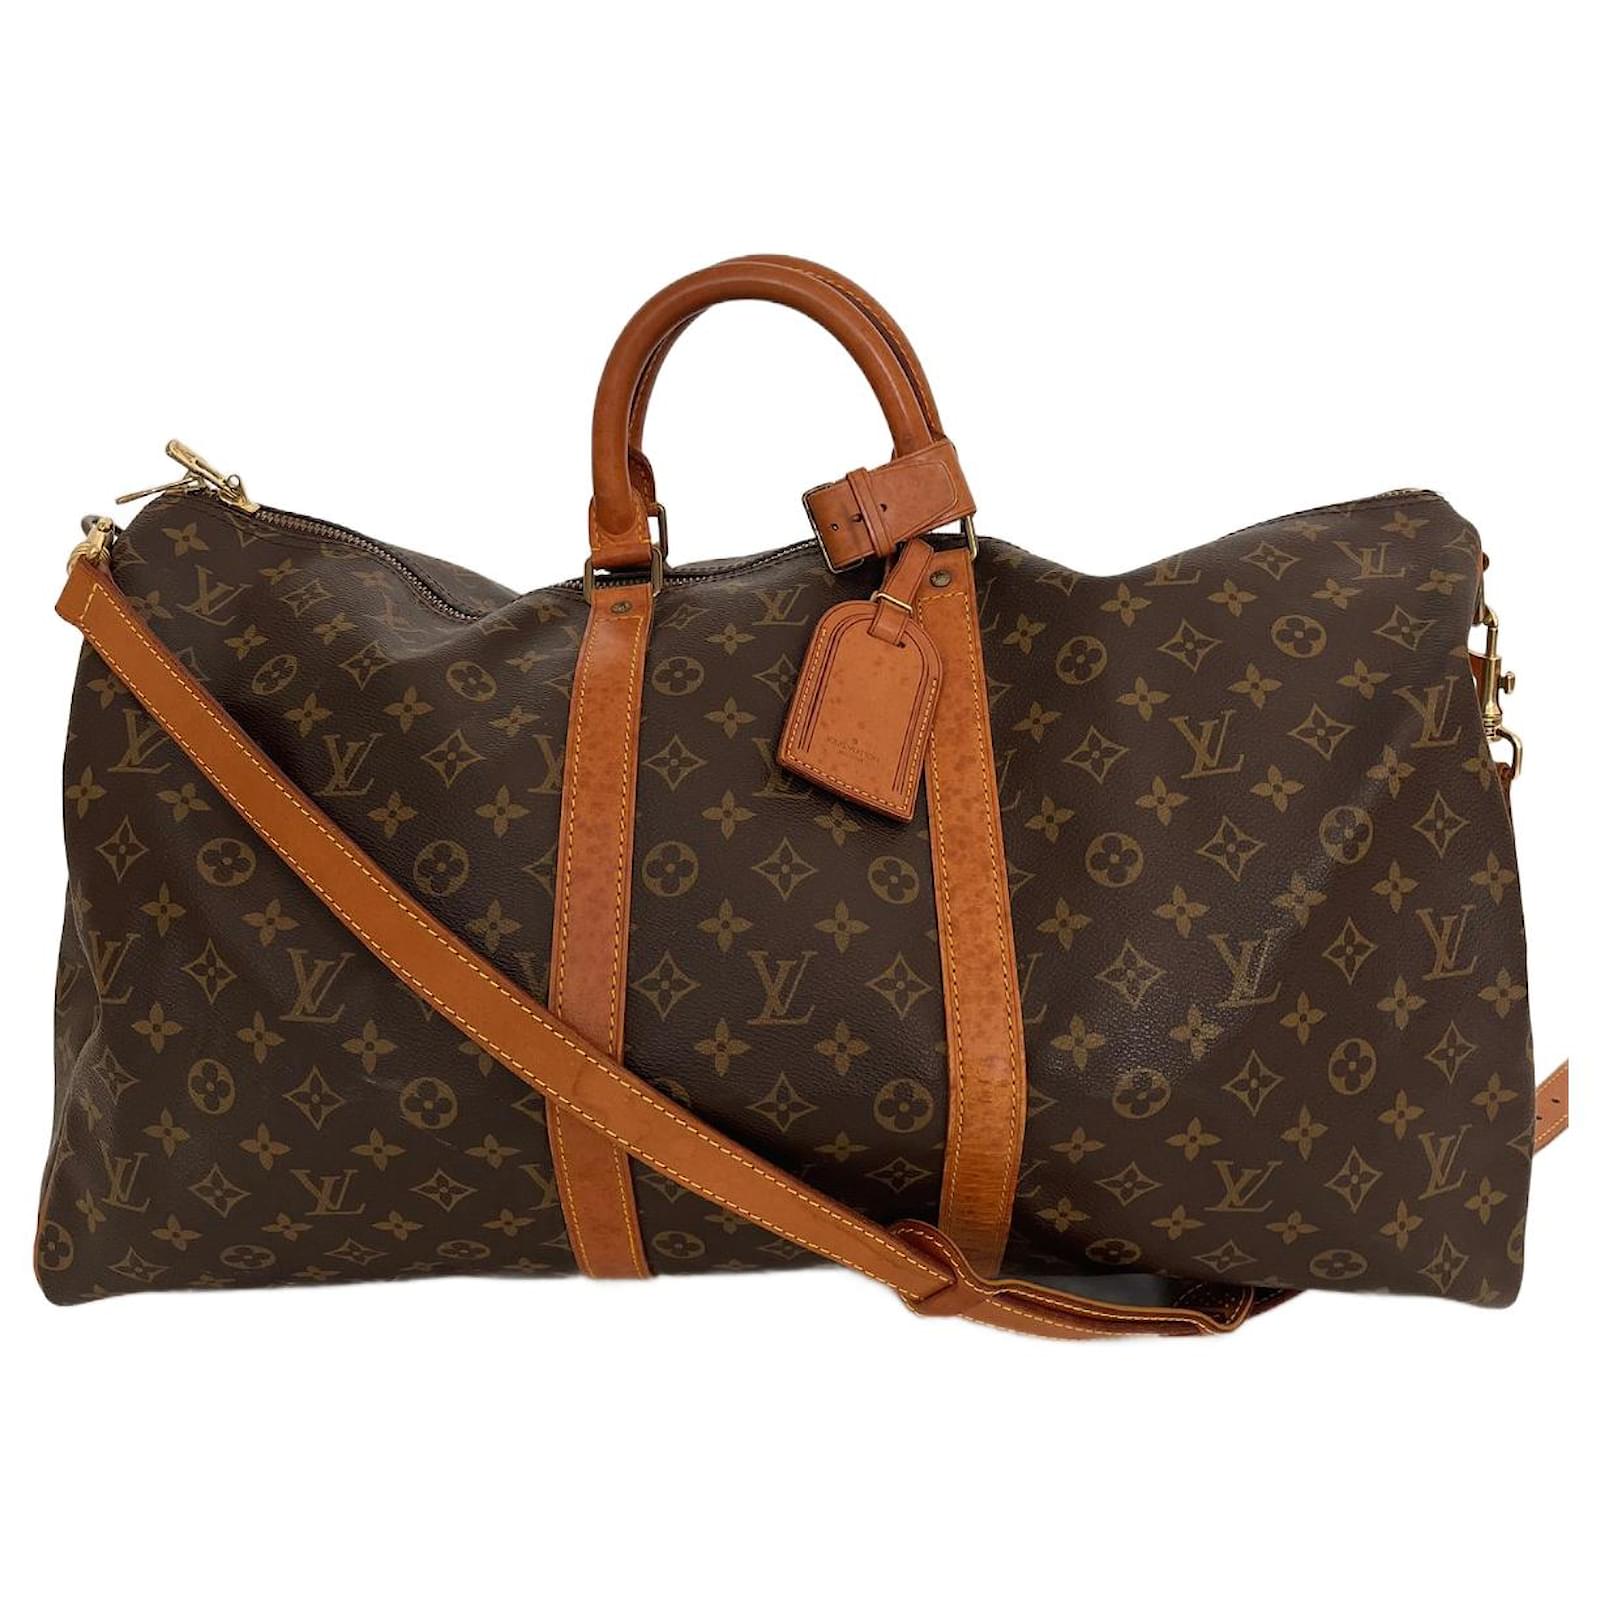 Travel in style with an original Louis Vuitton